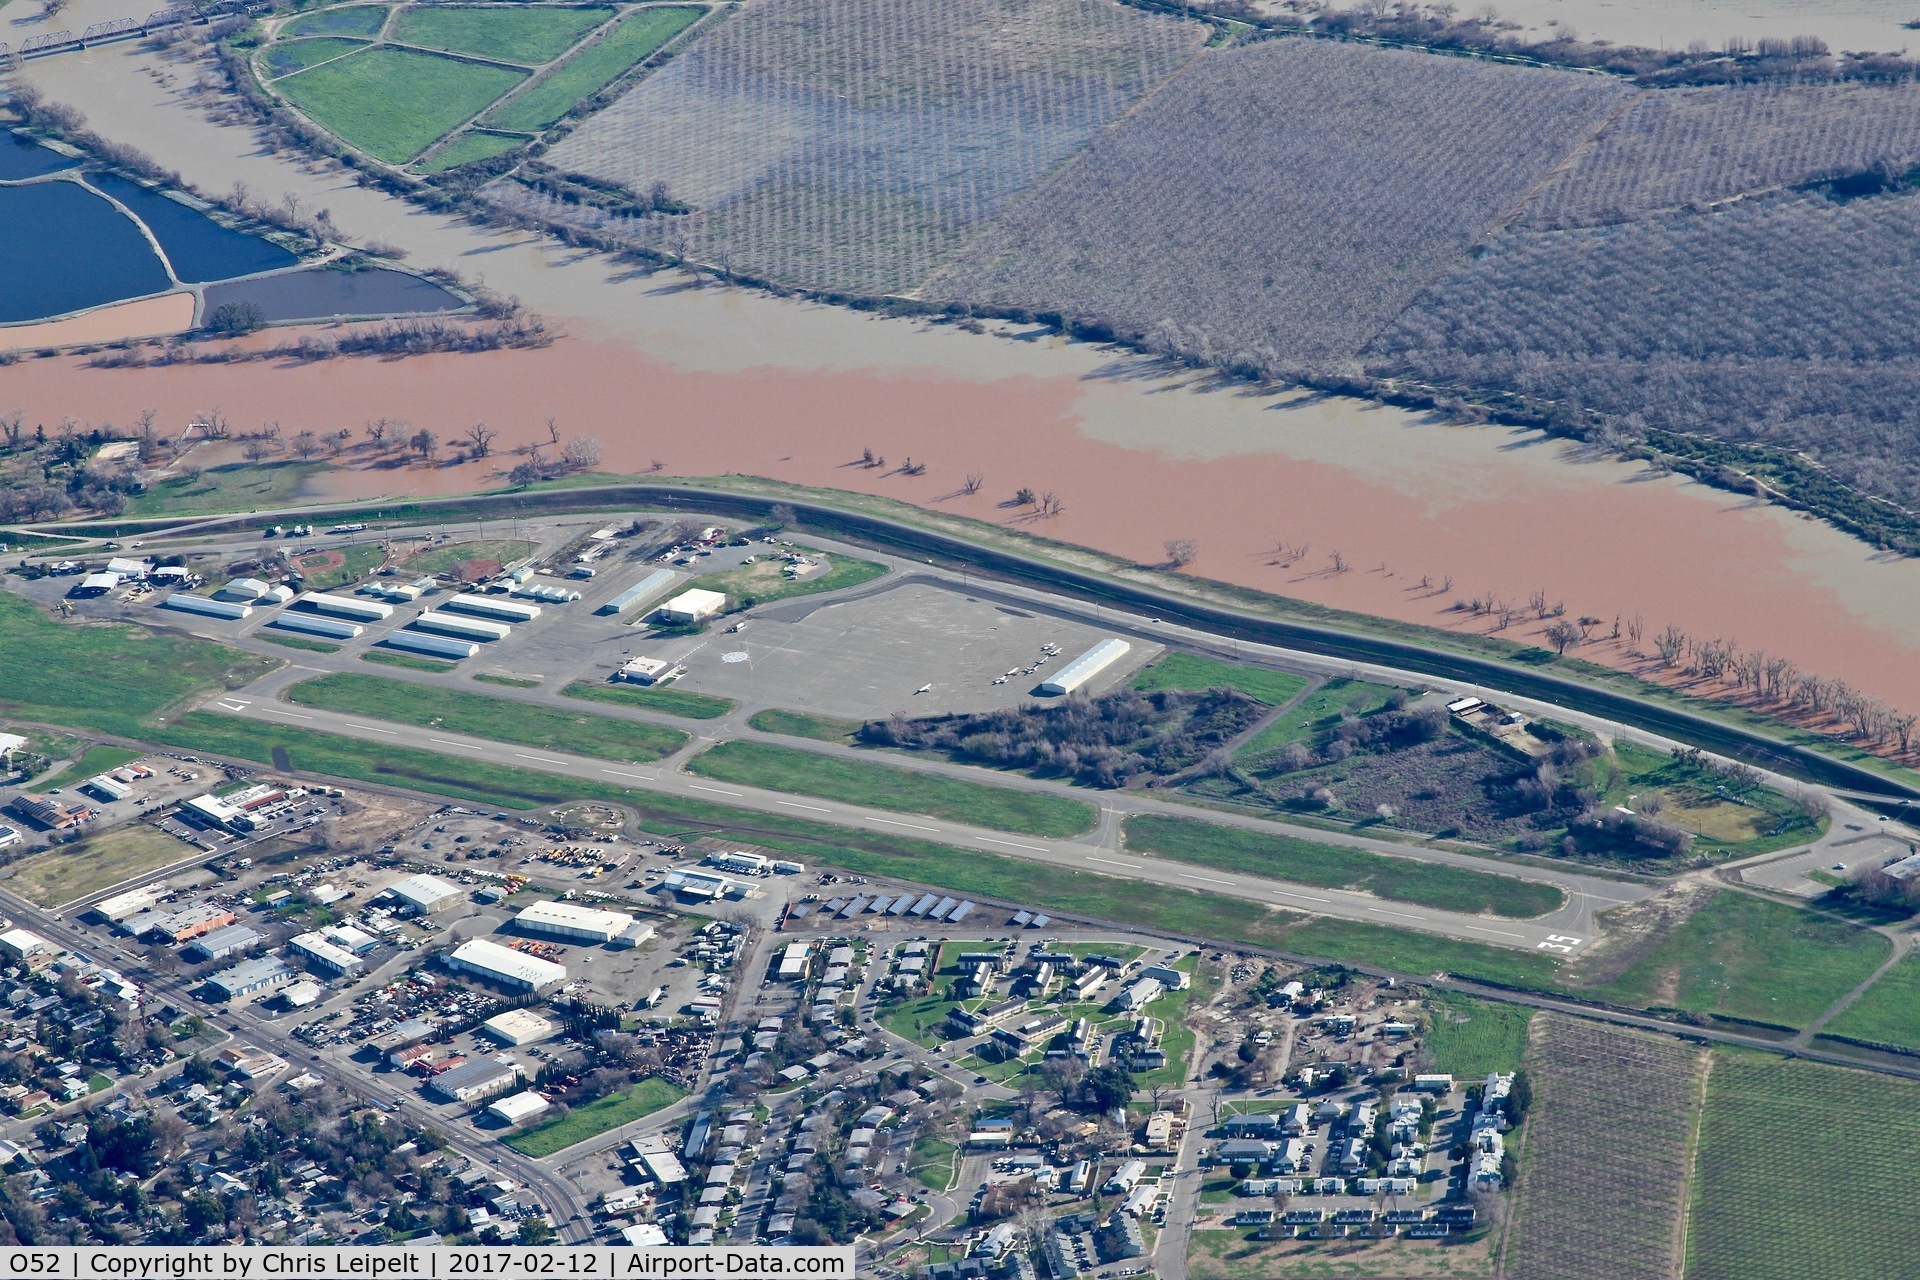 Sutter County Airport (O52) - Overhead Sutter County Airport enroute to Oroville Municipal Airport. Note the fill river abeam the airport. This was taken when Lake Oroville was over capacity and had the dam situation. In fact, mandatory evacuations were made the same day I took this p